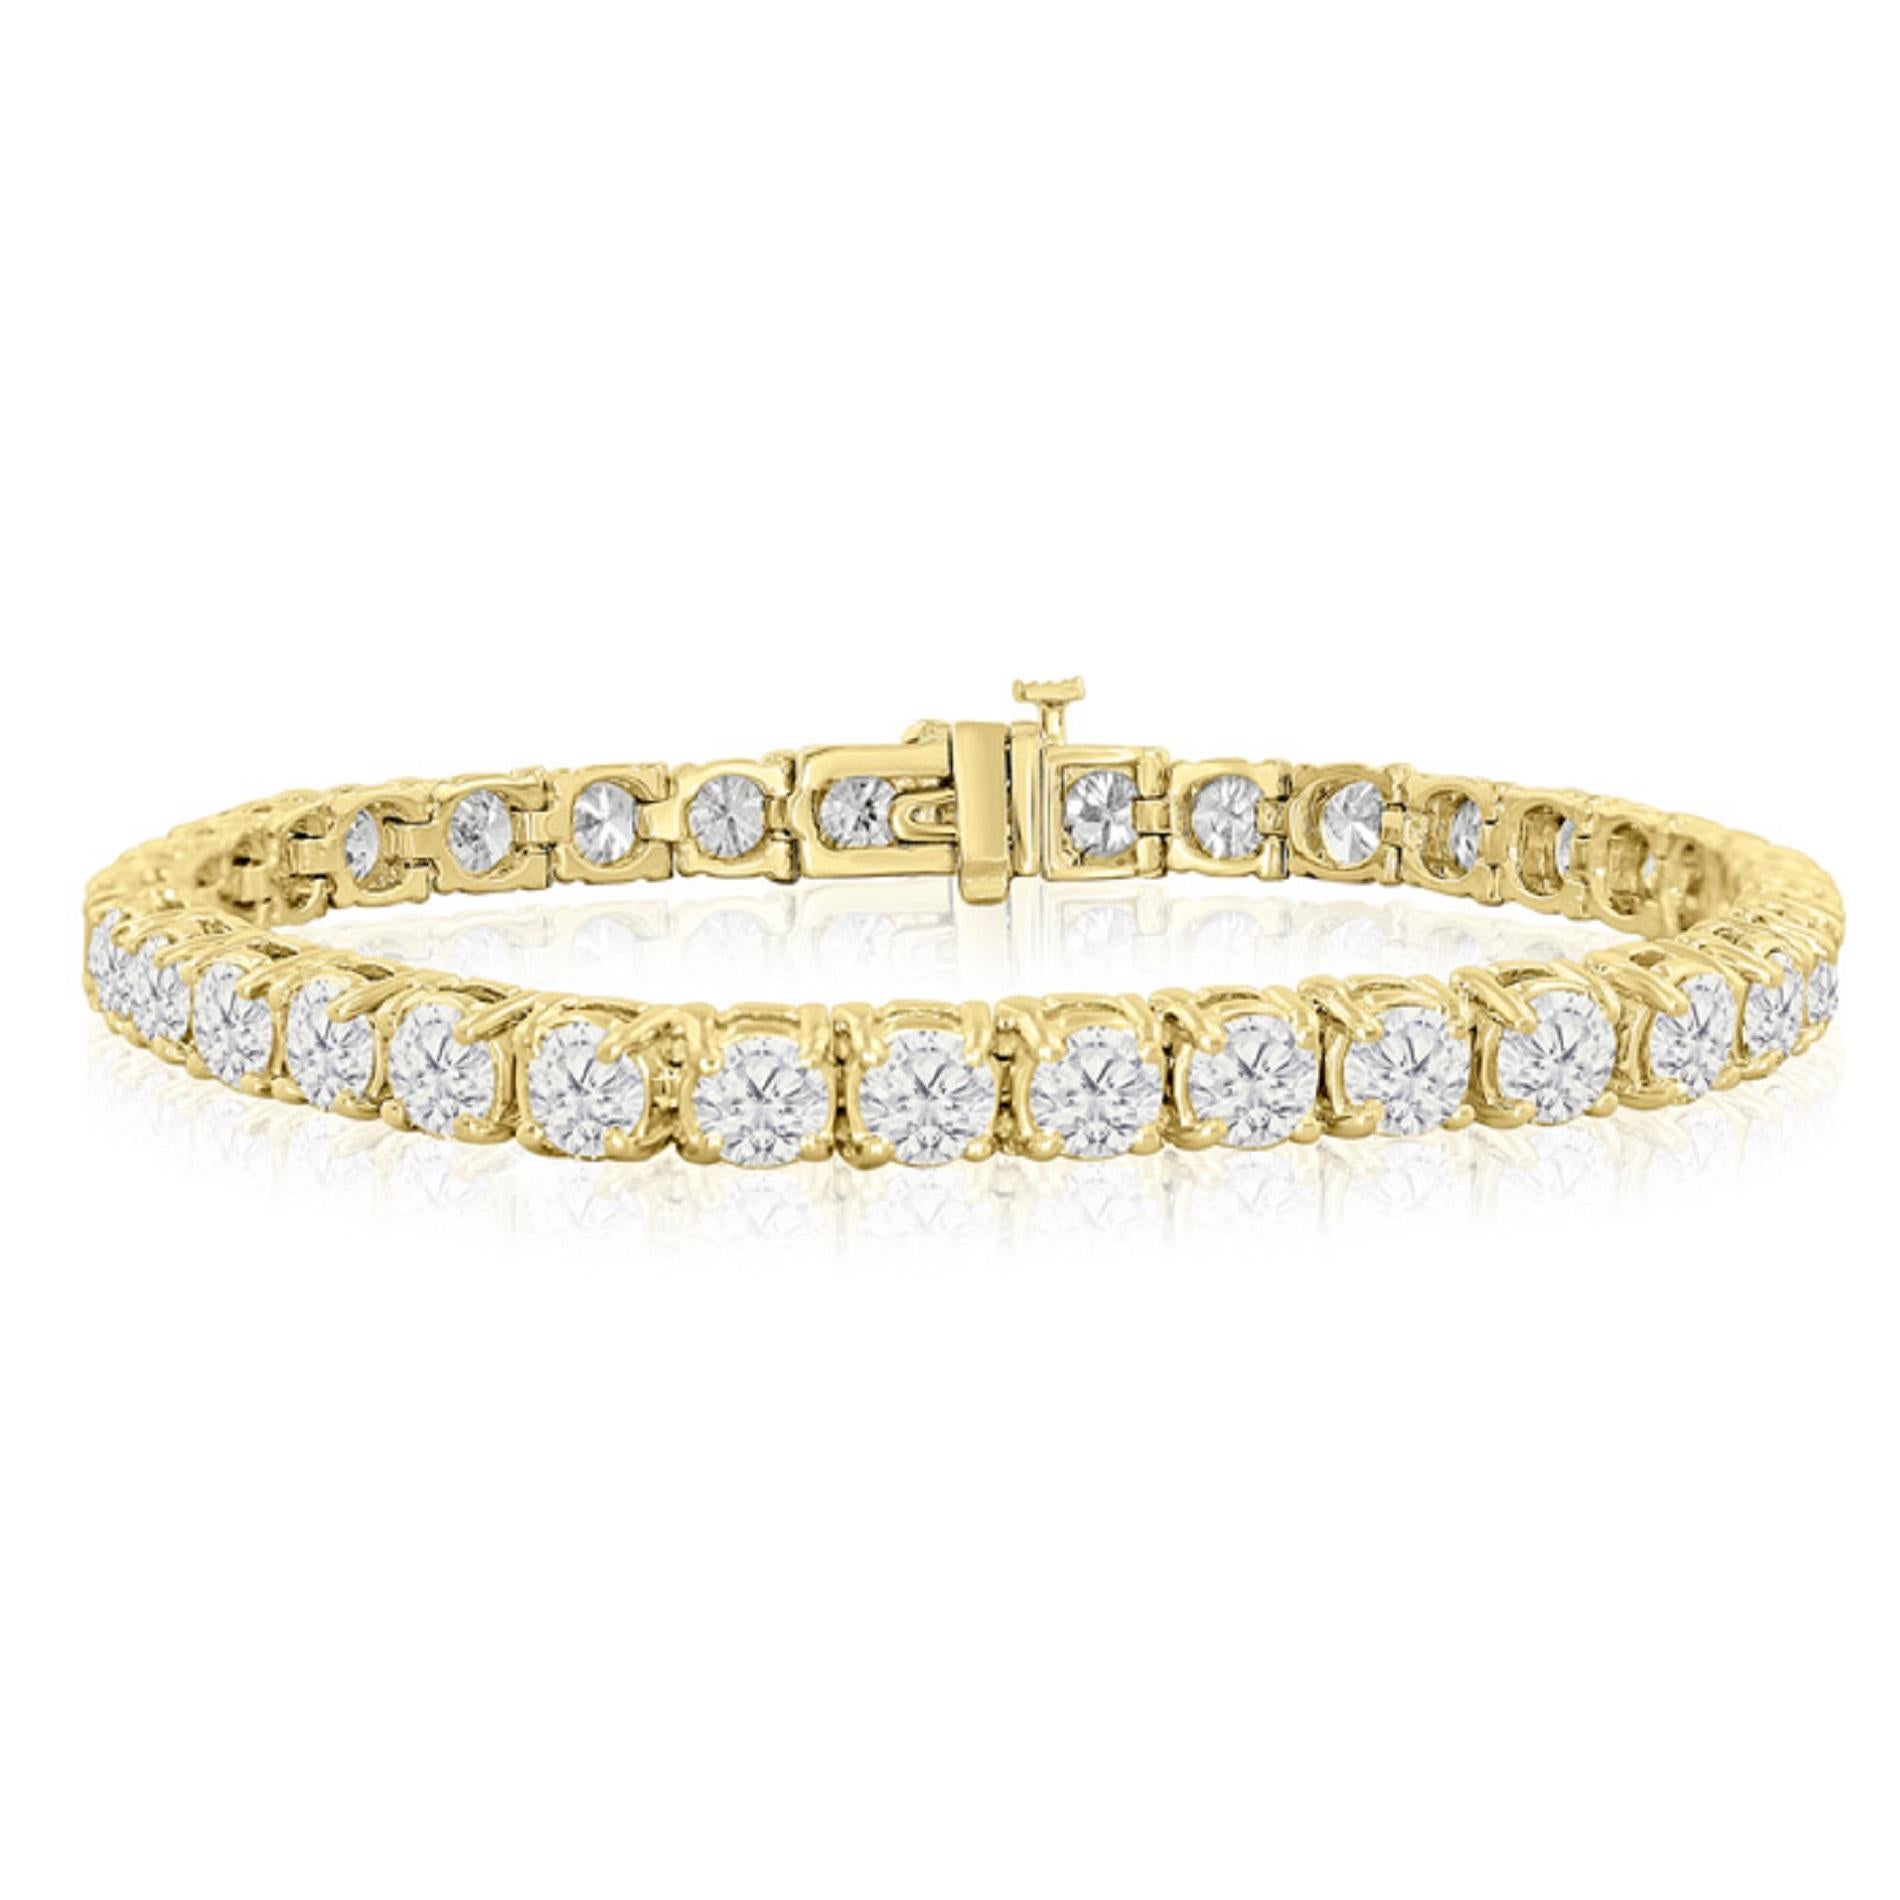 This exquisite tennis bracelet is a testament to timeless elegance and sophistication. Crafted in 18K yellow gold, it features a stunning array of round diamonds meticulously set in a claw prong basket setting, totaling an impressive 17.65 carats in